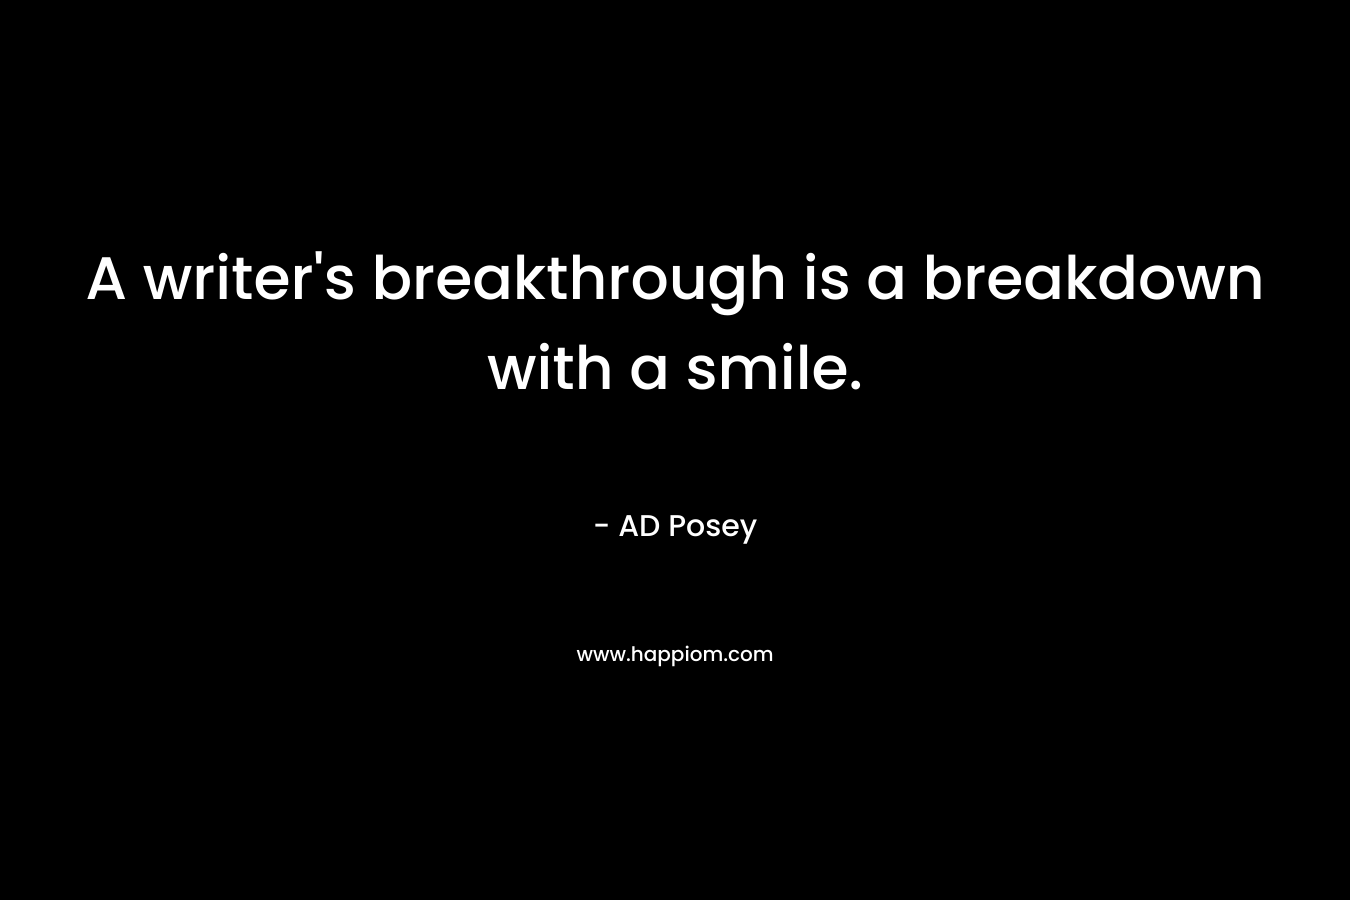 A writer's breakthrough is a breakdown with a smile.